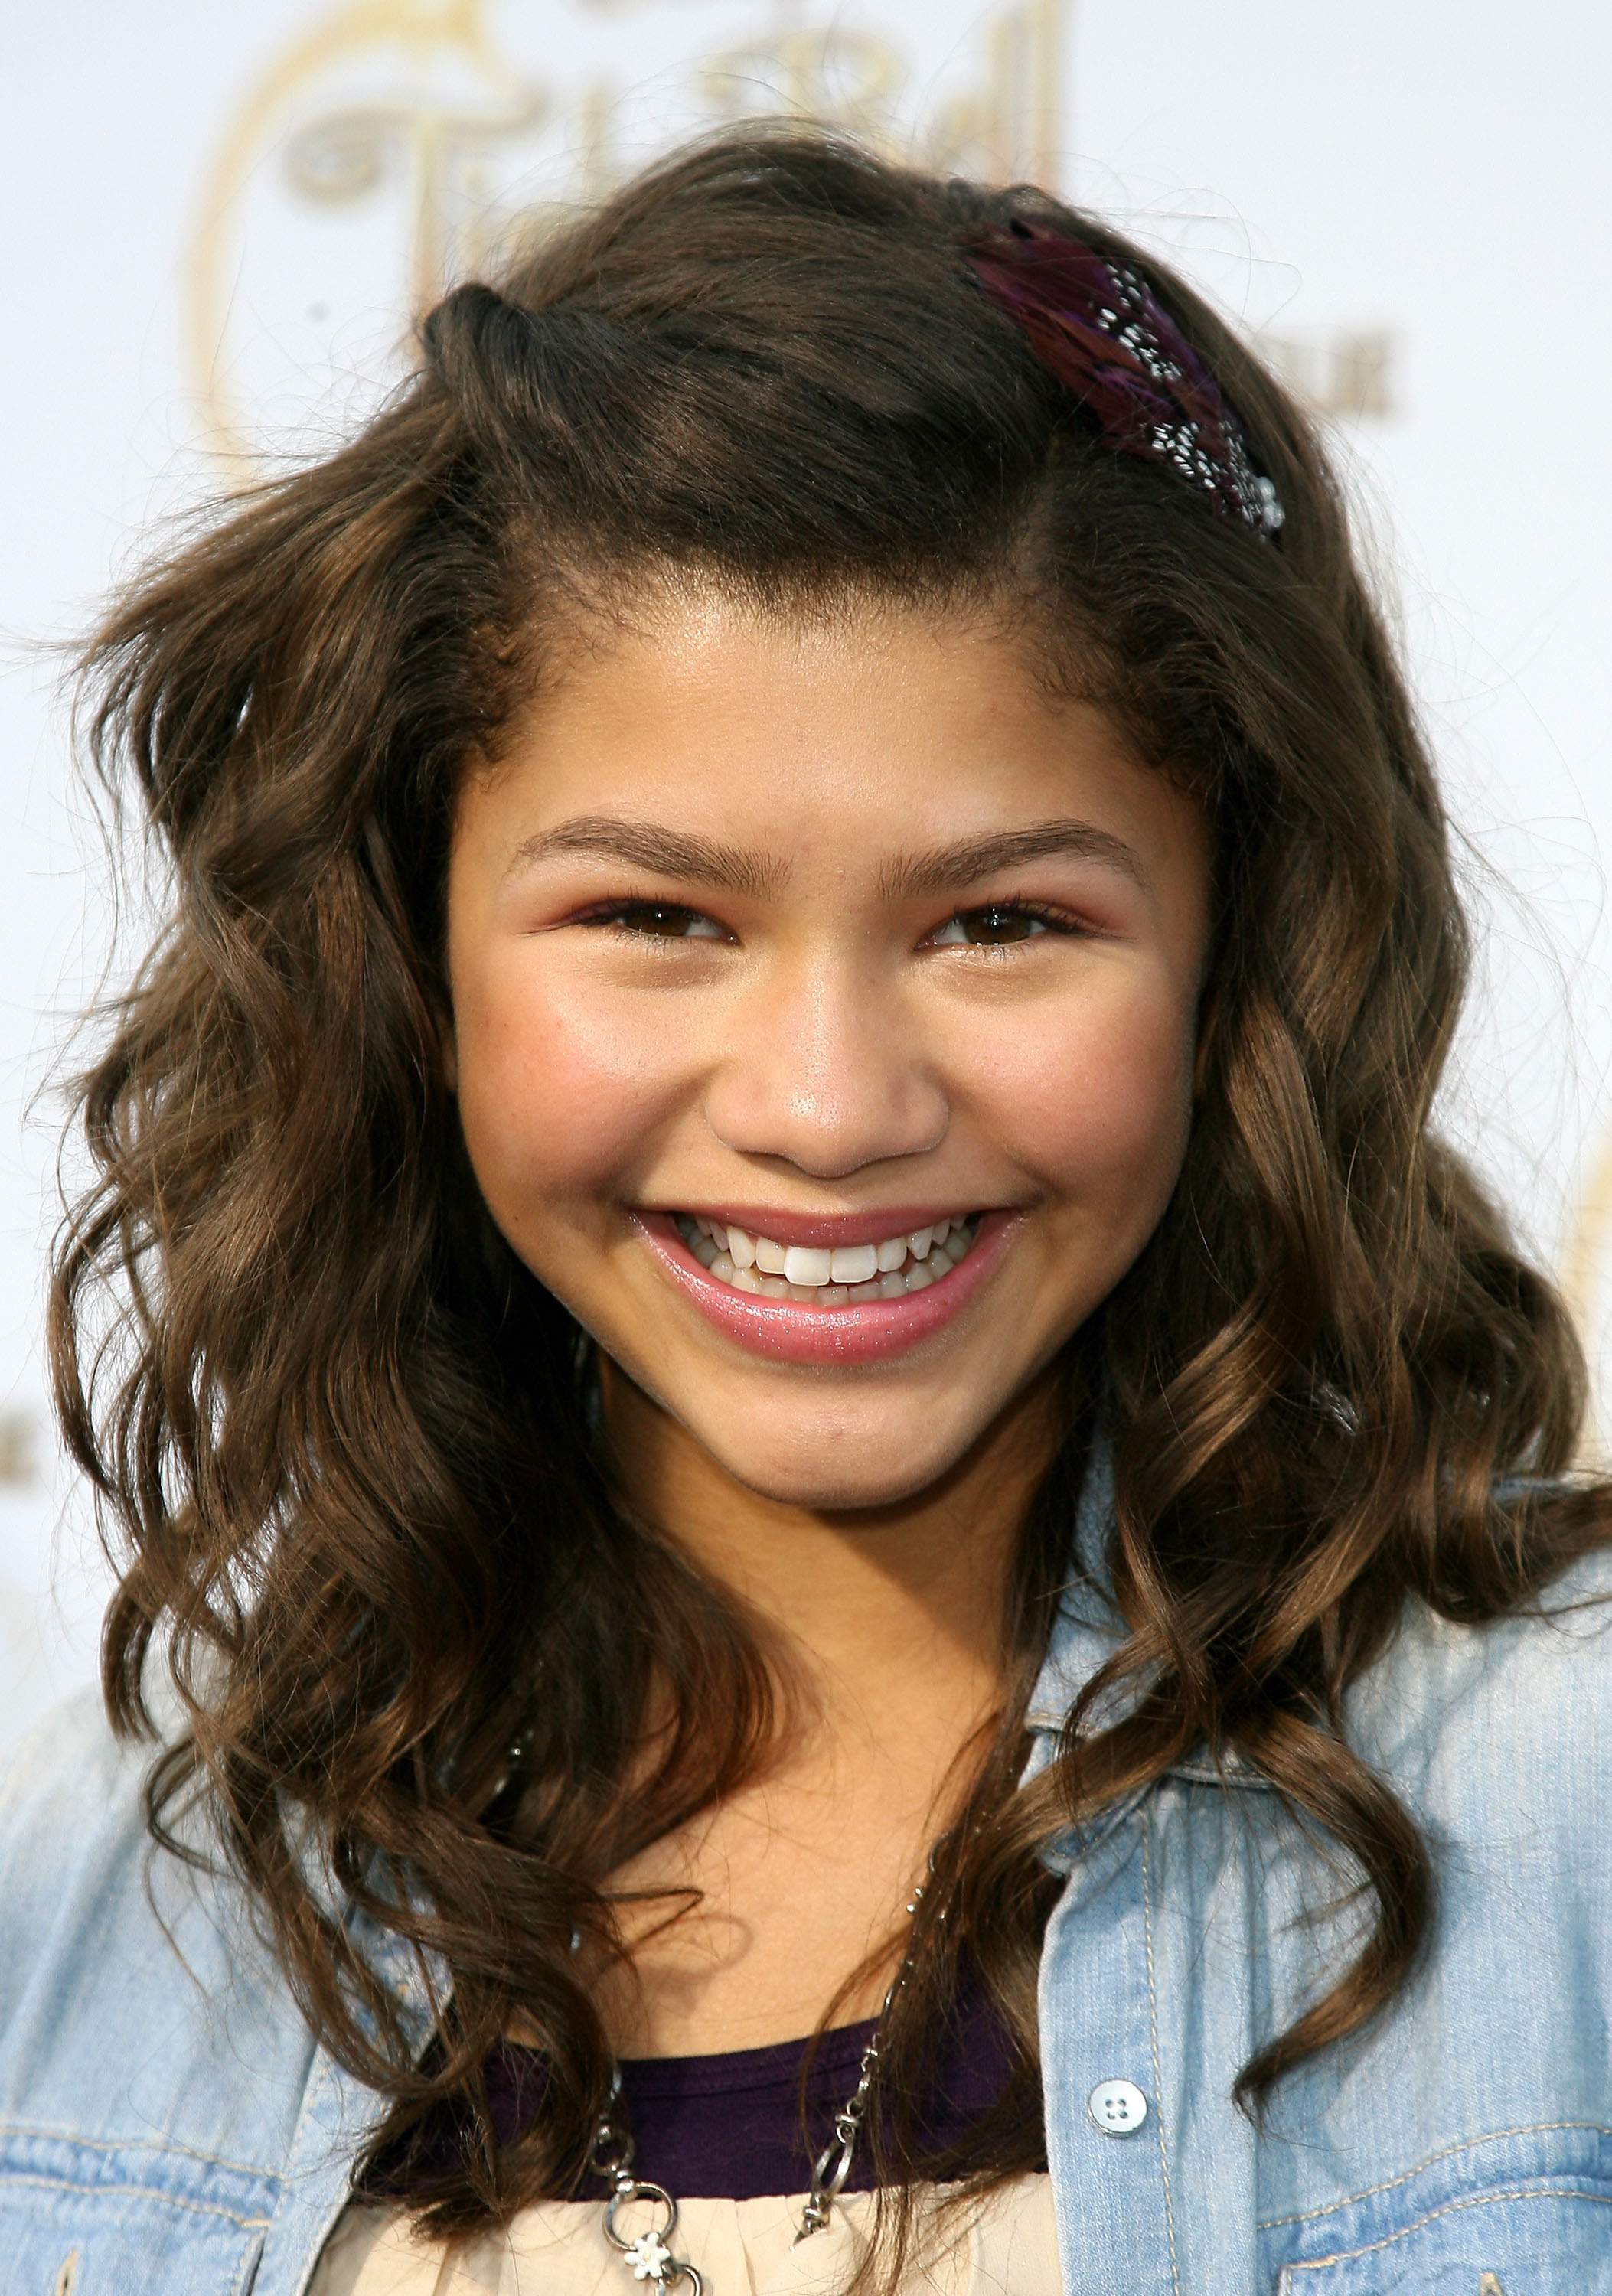 Zendaya Coleman arrives at the screening of Disney's "Tinker Bell And The Great Fairy Rescue" in Beverly Hills, California, on August 28, 2010. | Source: Getty Images